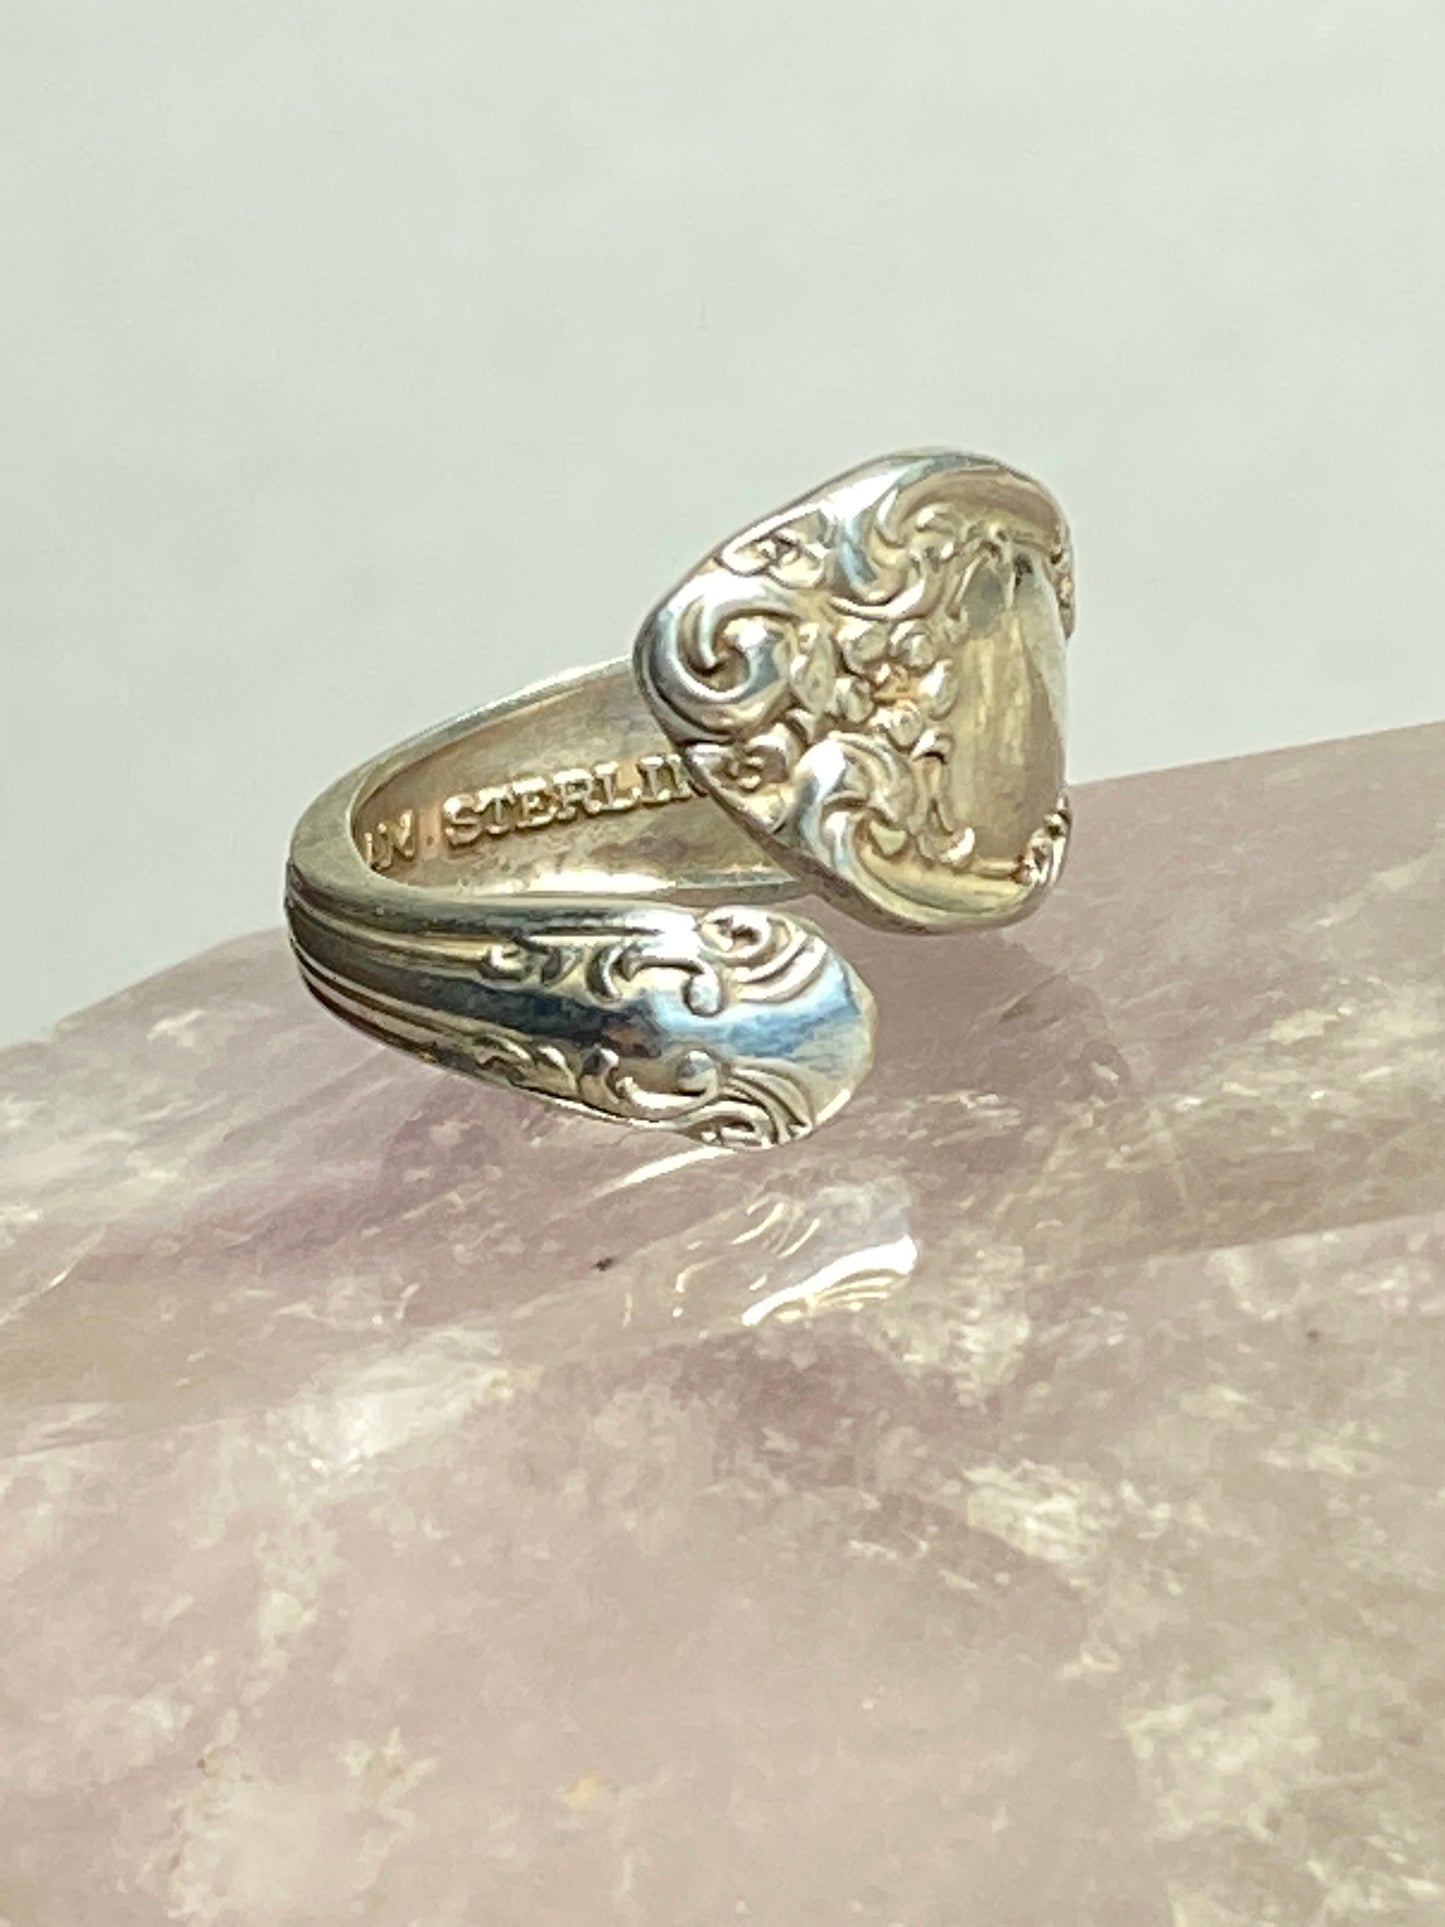 spoon ring Gorham floral pinky sterling silver ring women